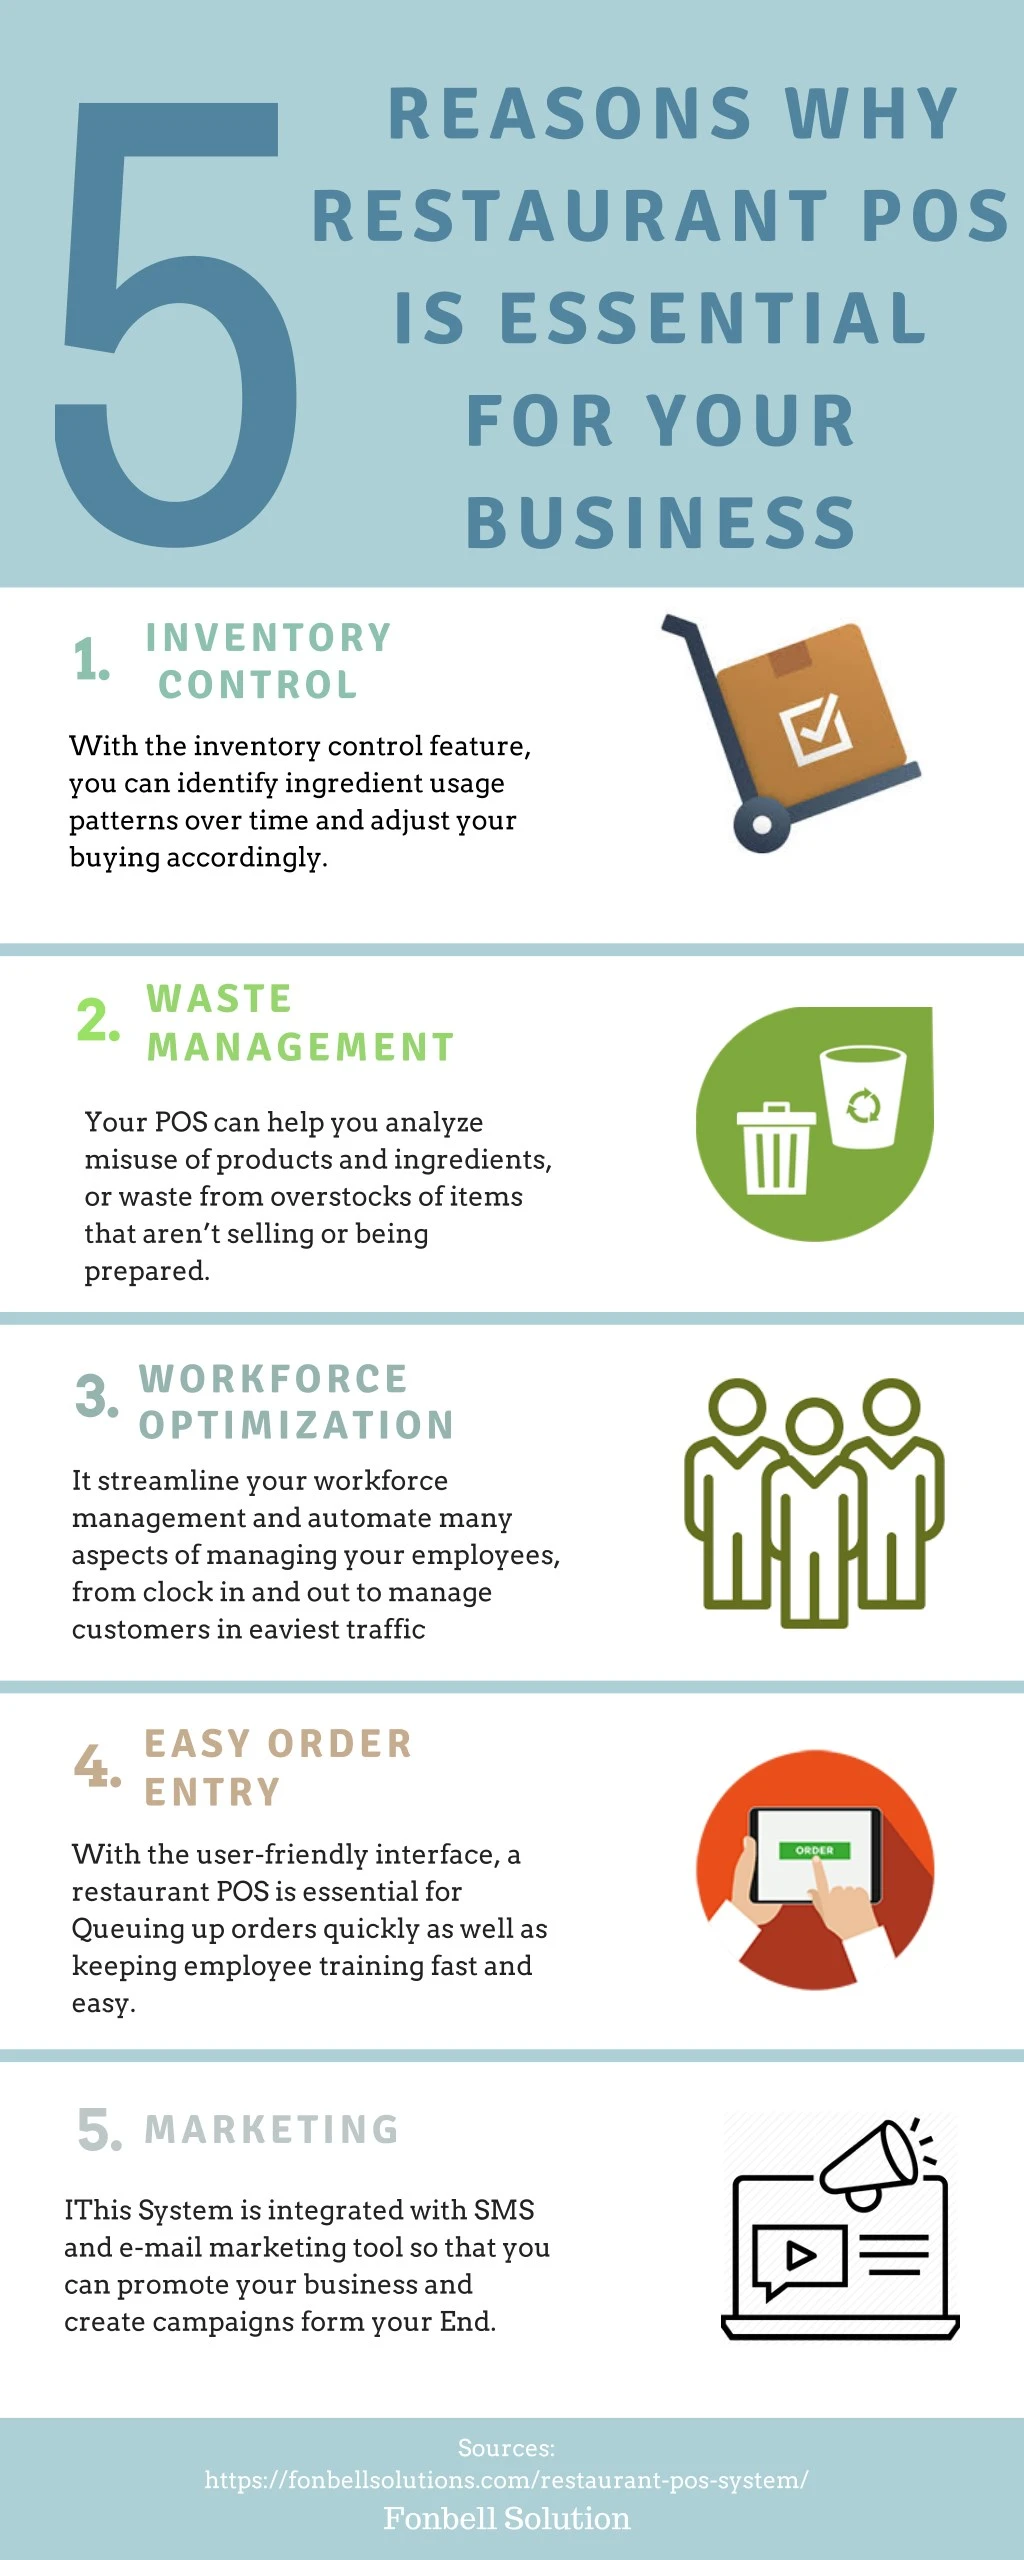 reasons why restaurant pos is essential for your